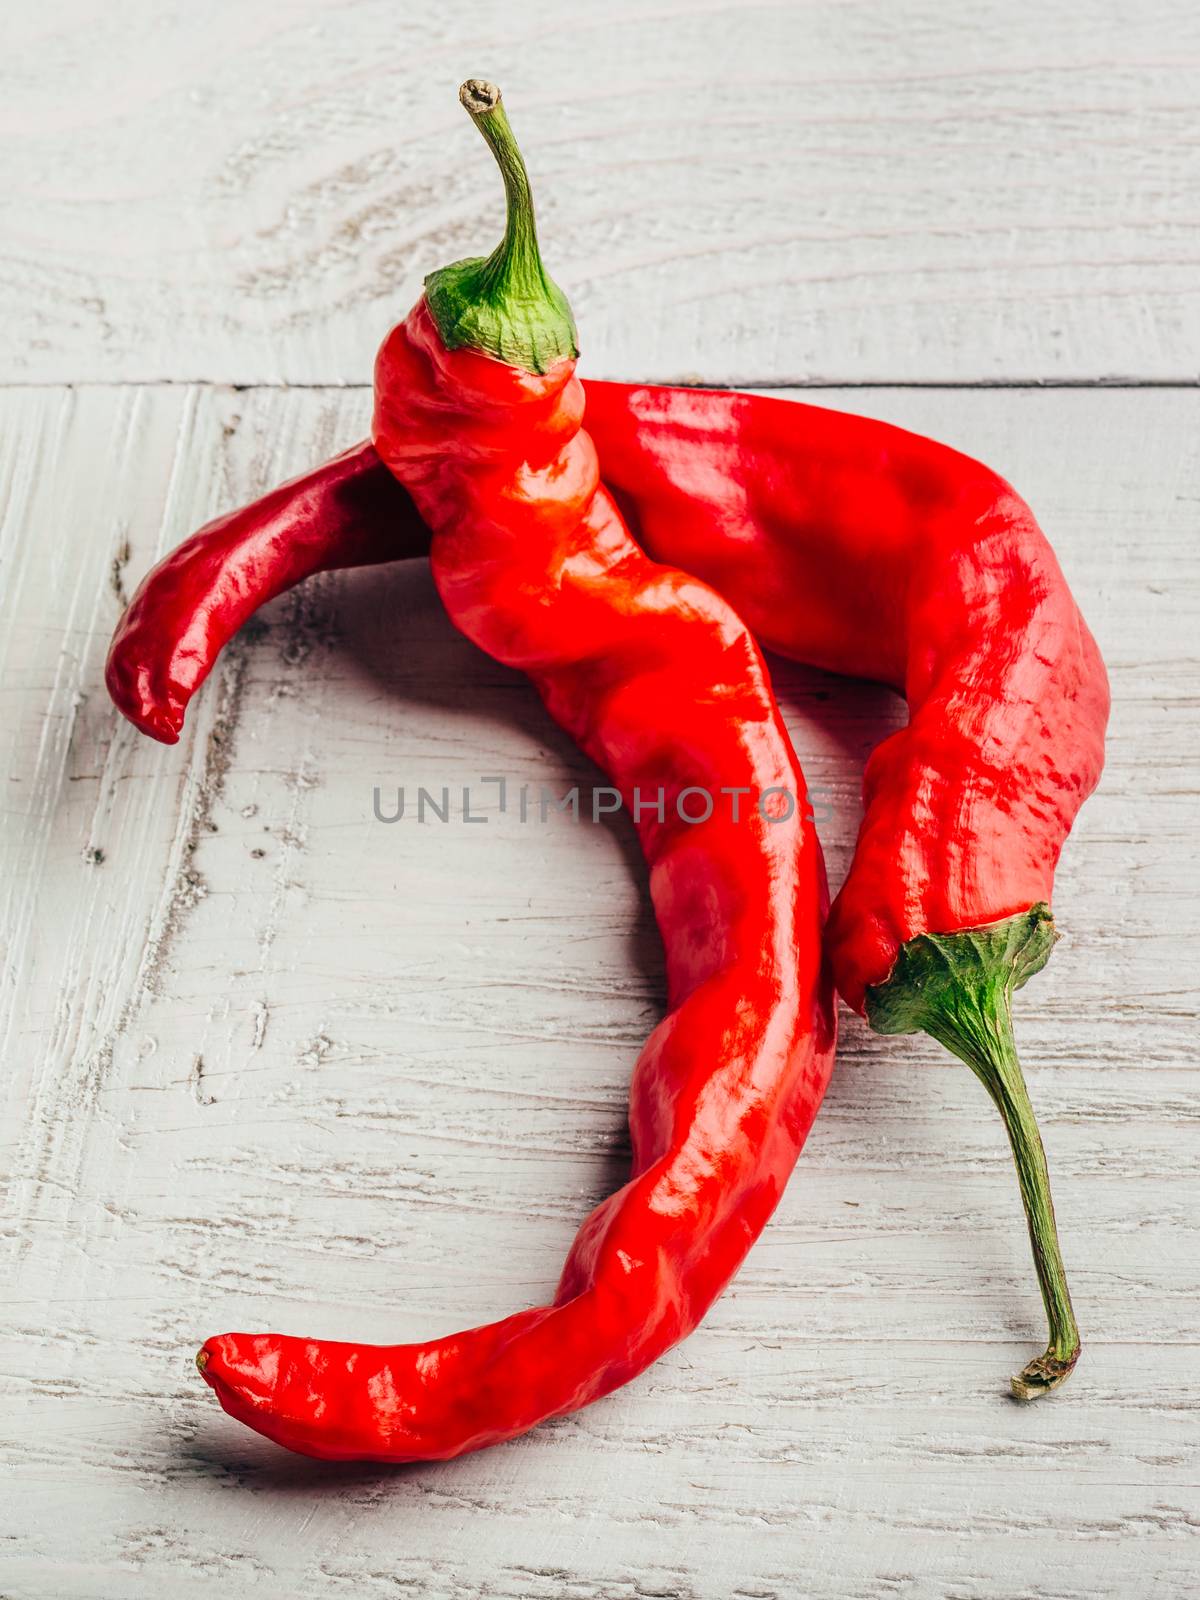 Two chili peppers over wooden background. by Seva_blsv